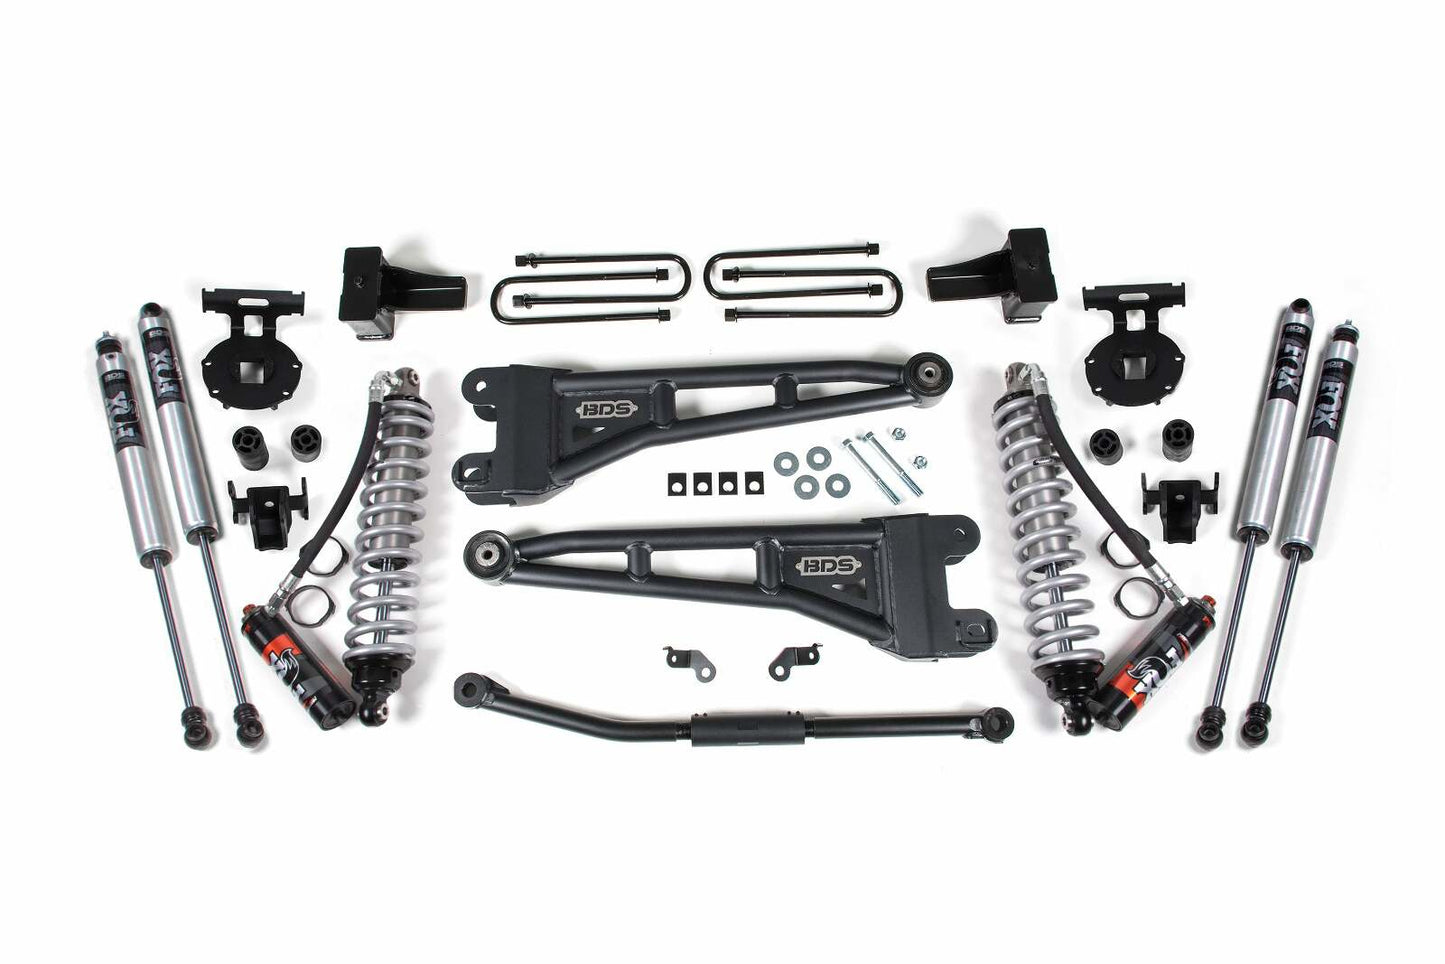 2011-2016 Ford F250/F350 4wd 2.5" Radius Arm Suspension Lift Kit, Diesel - Fox 2.5 PES C/O Front, Fox 2.0 IFP PS Aux Front, Fox 2.0 IFP PS Rear